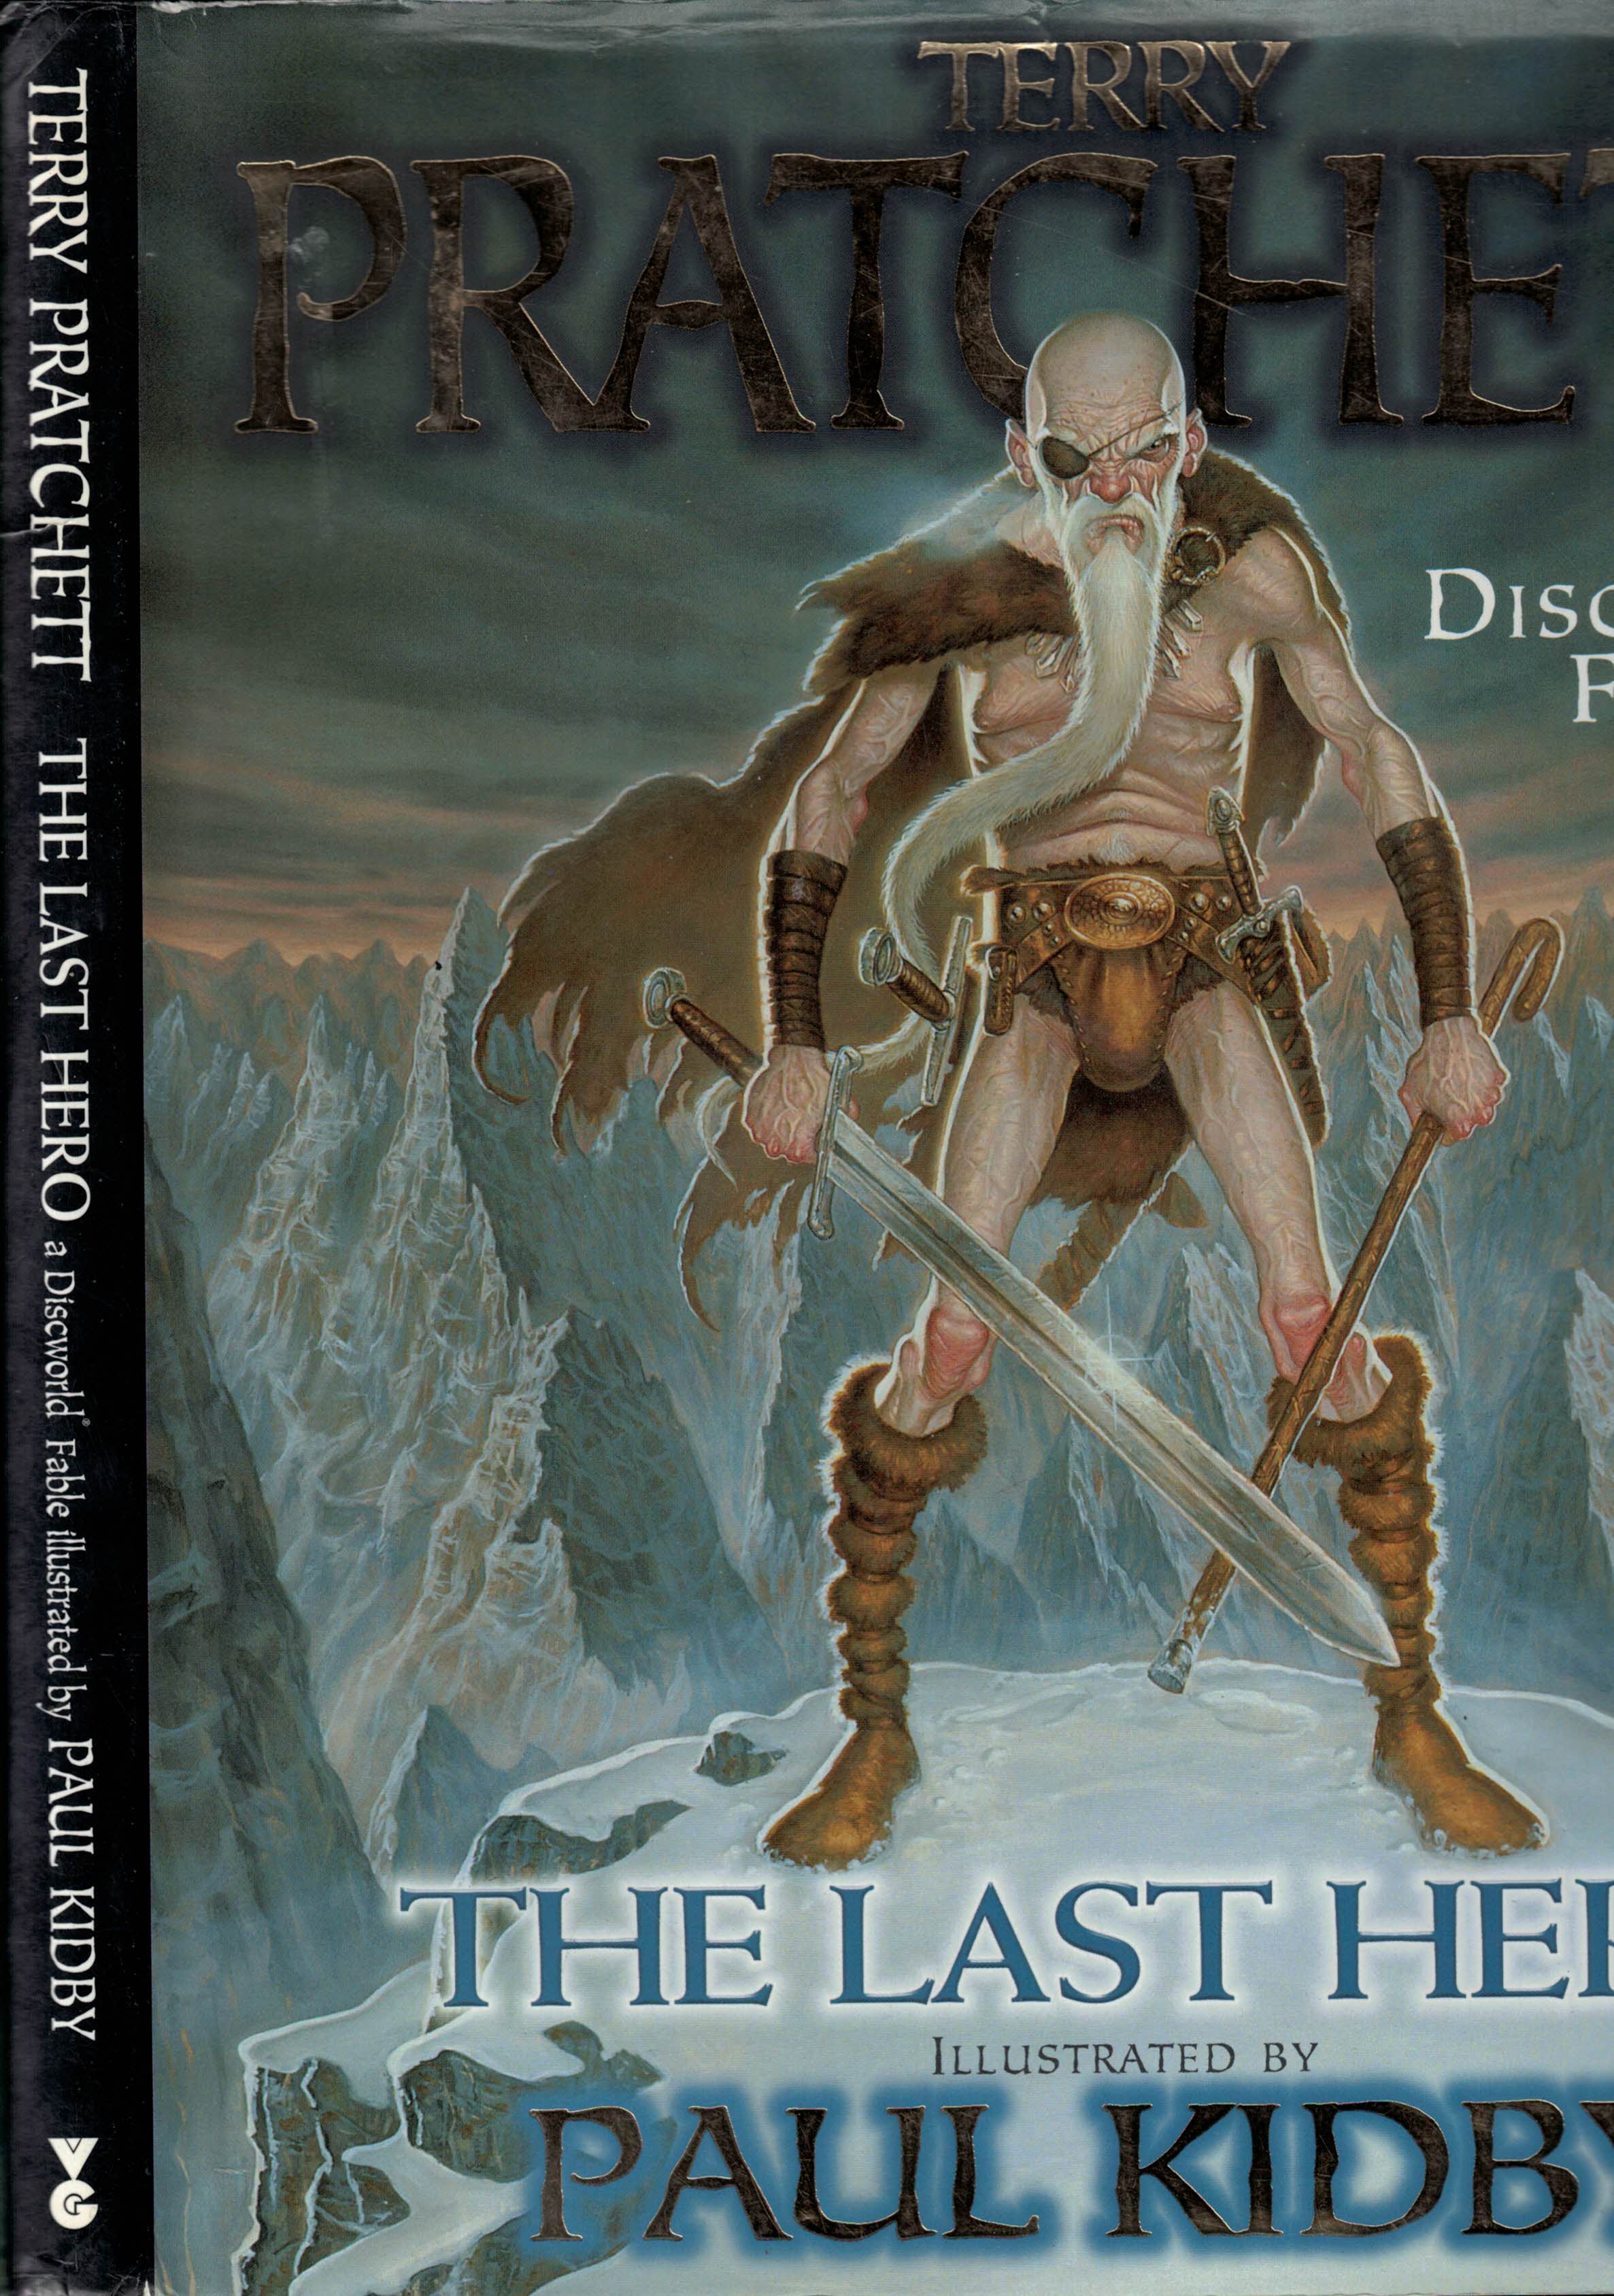 The Last Hero. A Discworld Fable.